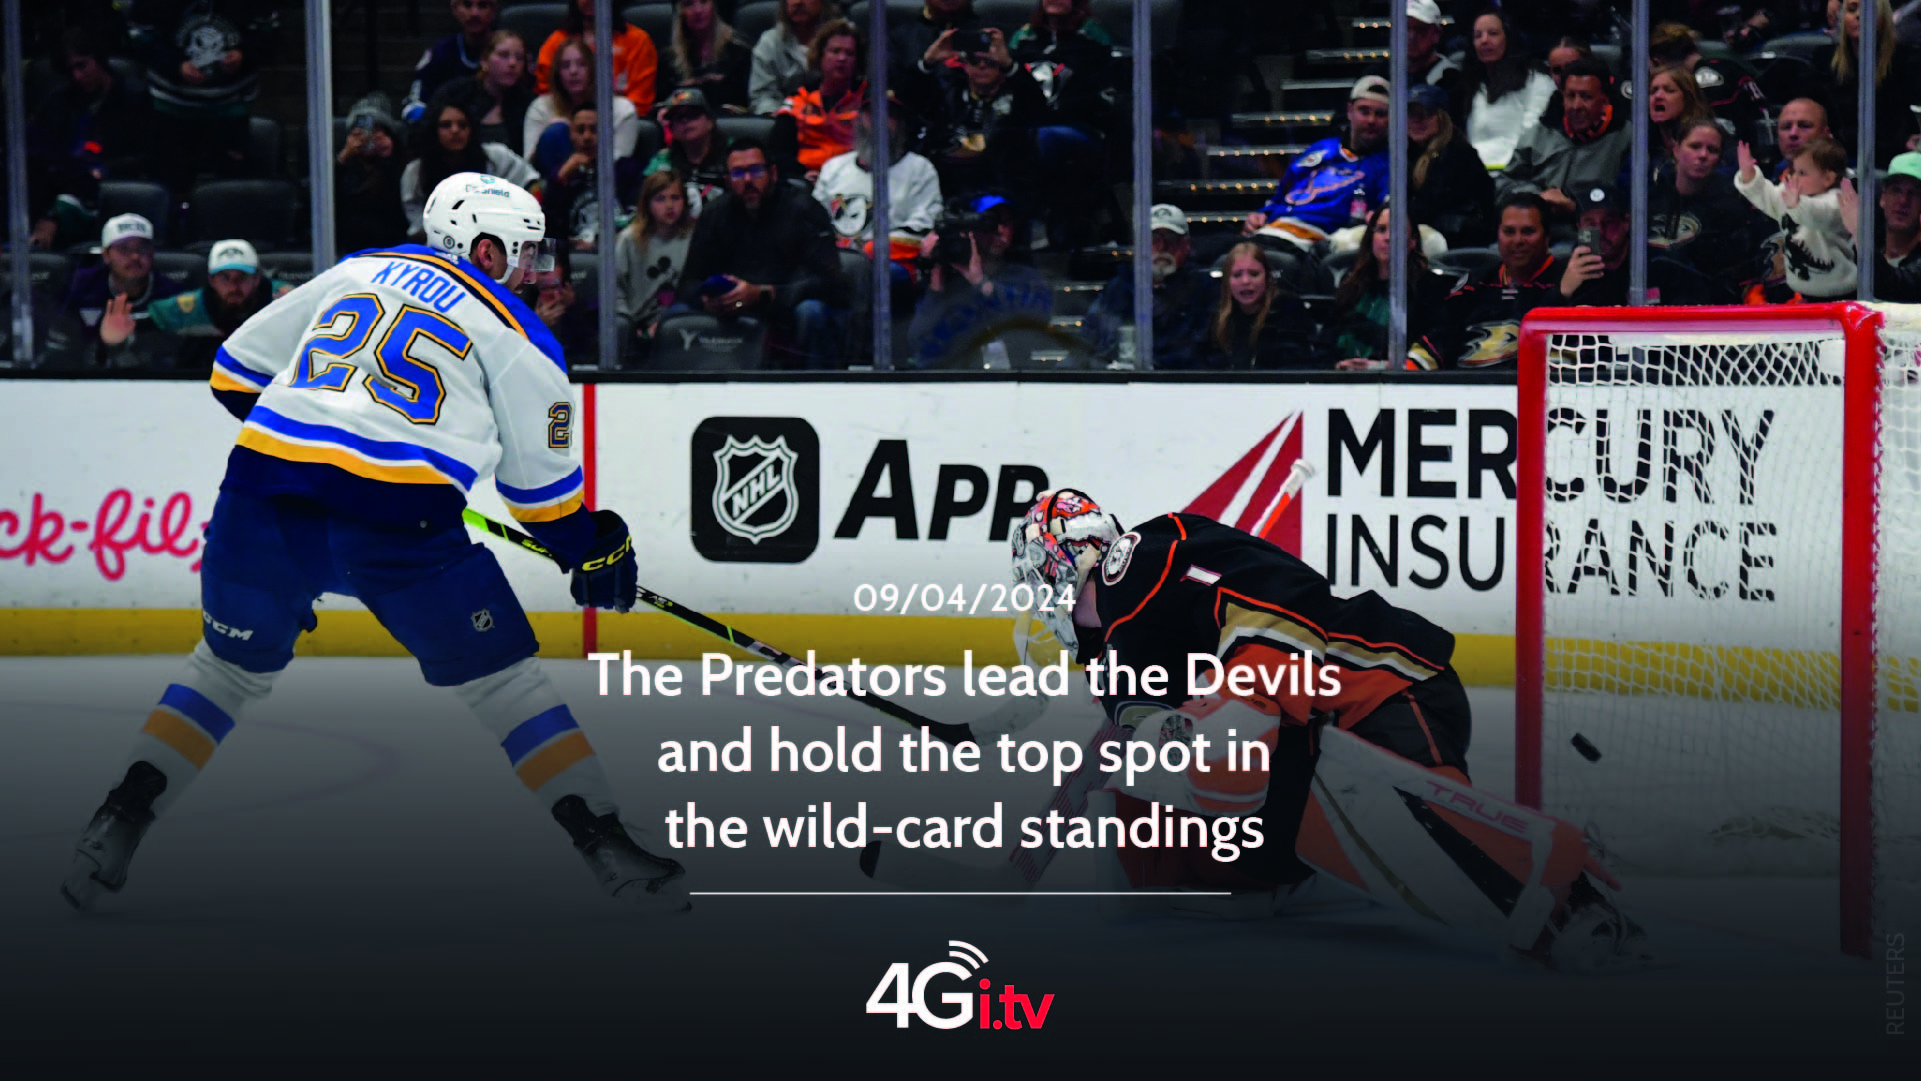 Lesen Sie mehr über den Artikel The Predators lead the Devils and hold the top spot in the wild-card standings